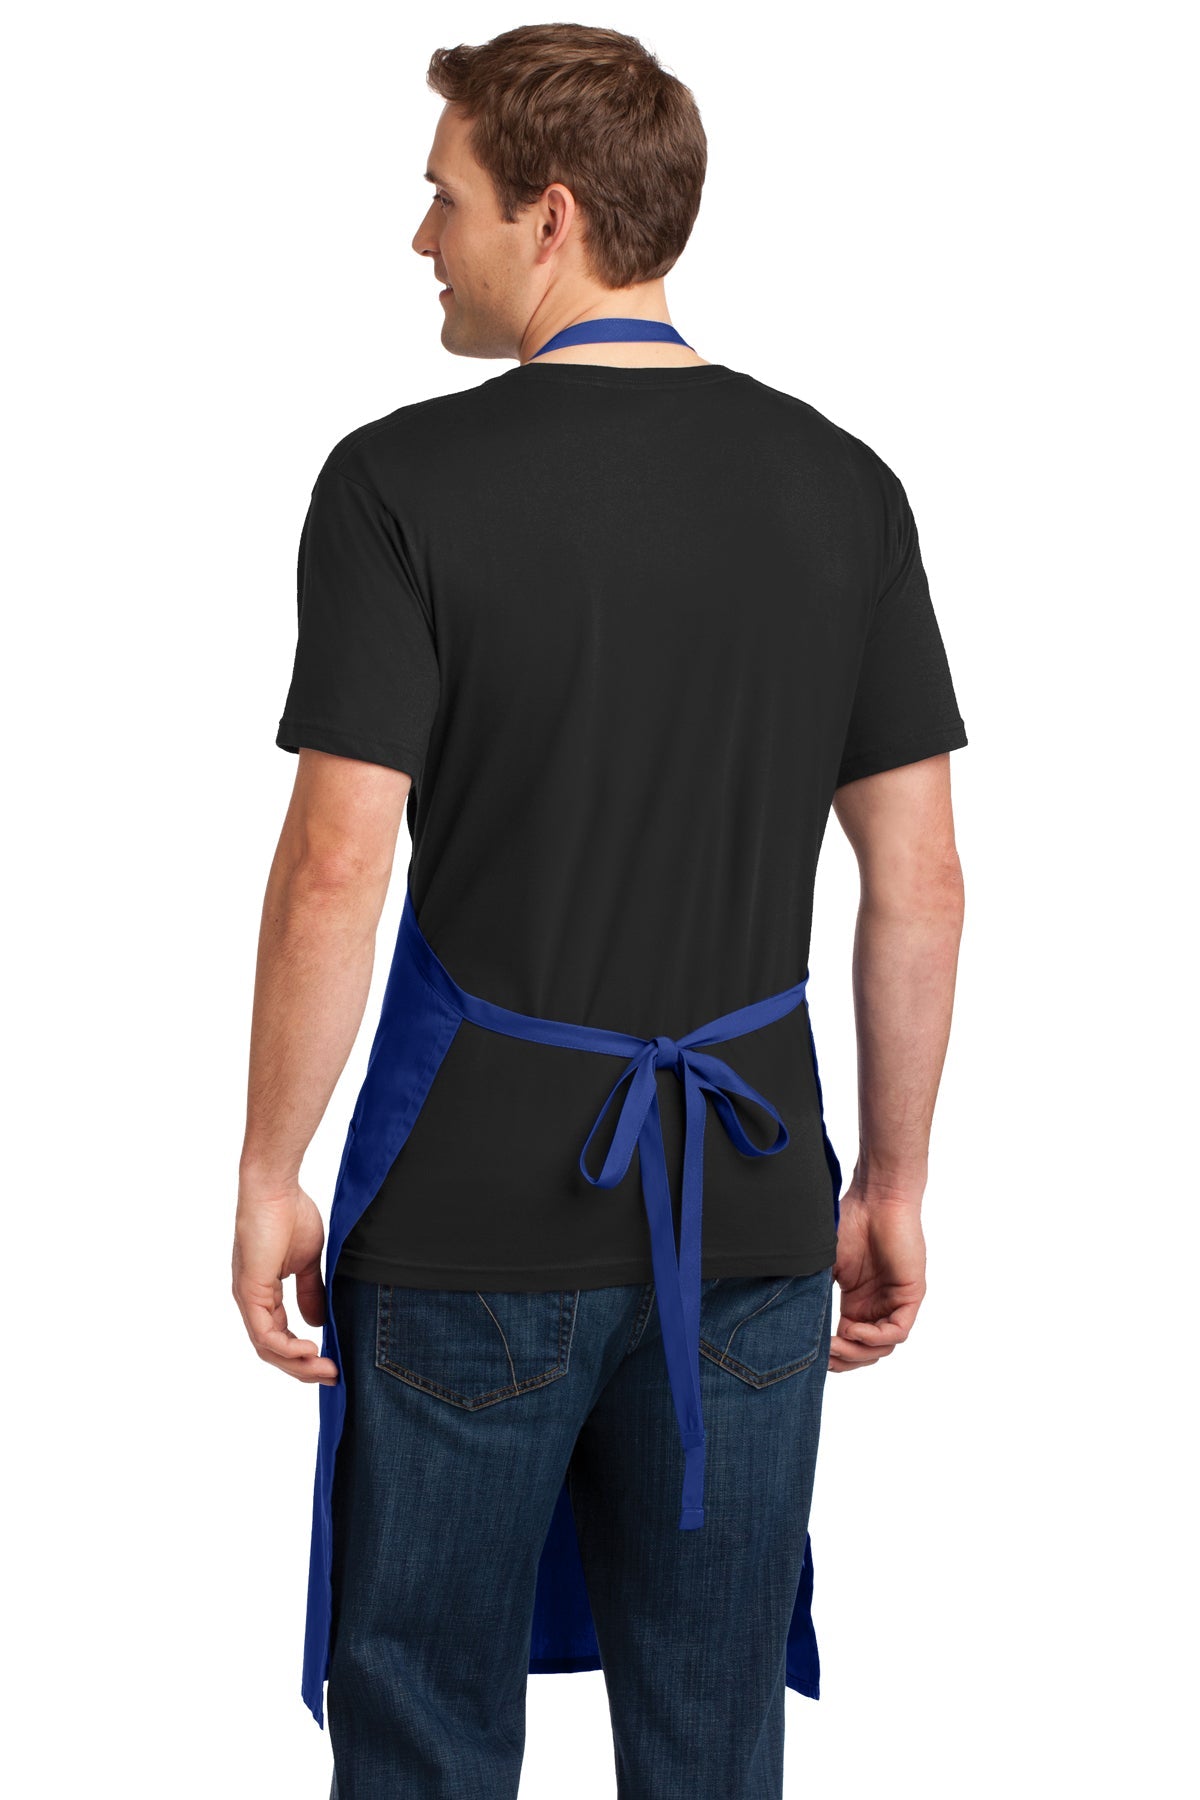 Port Authority Easy Care Customized Extra Long Bib Aprons with Stain Release, Royal